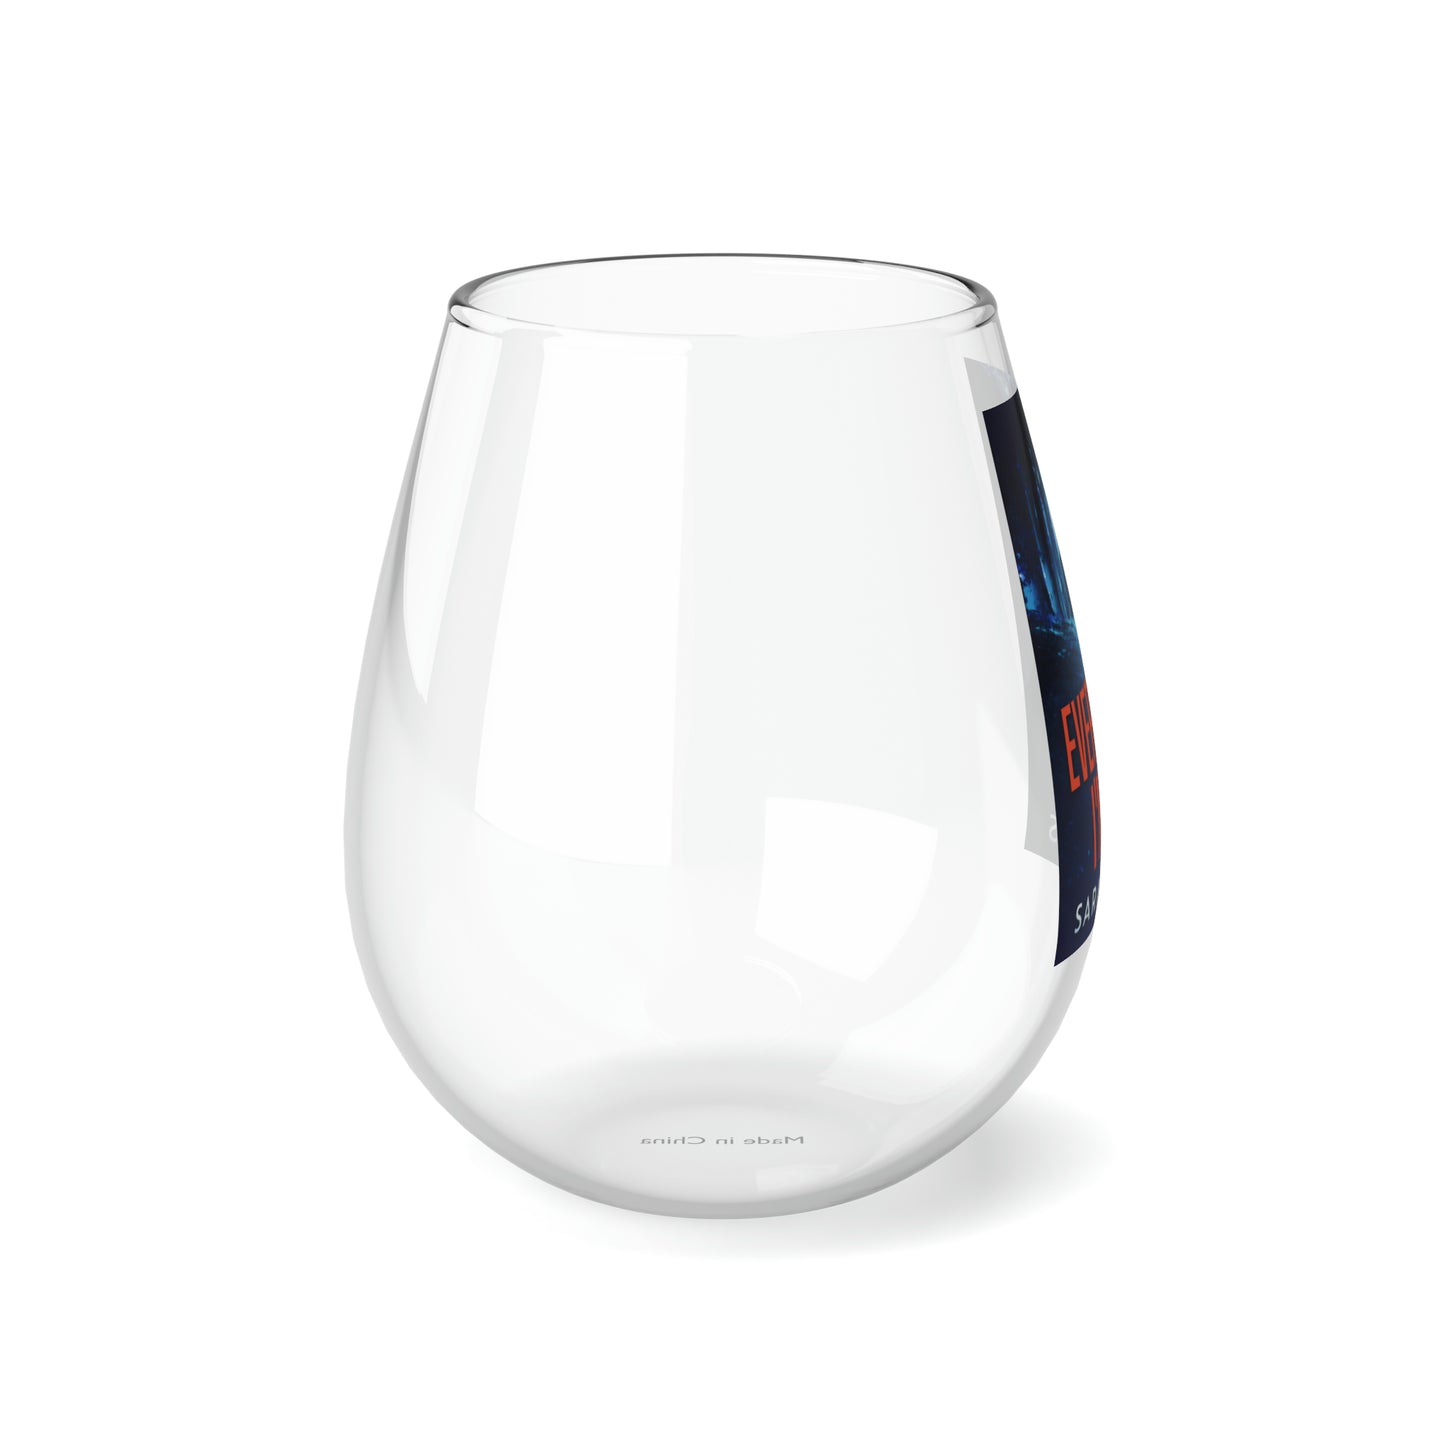 Everything I'm Not - Stemless Wine Glass, 11.75oz